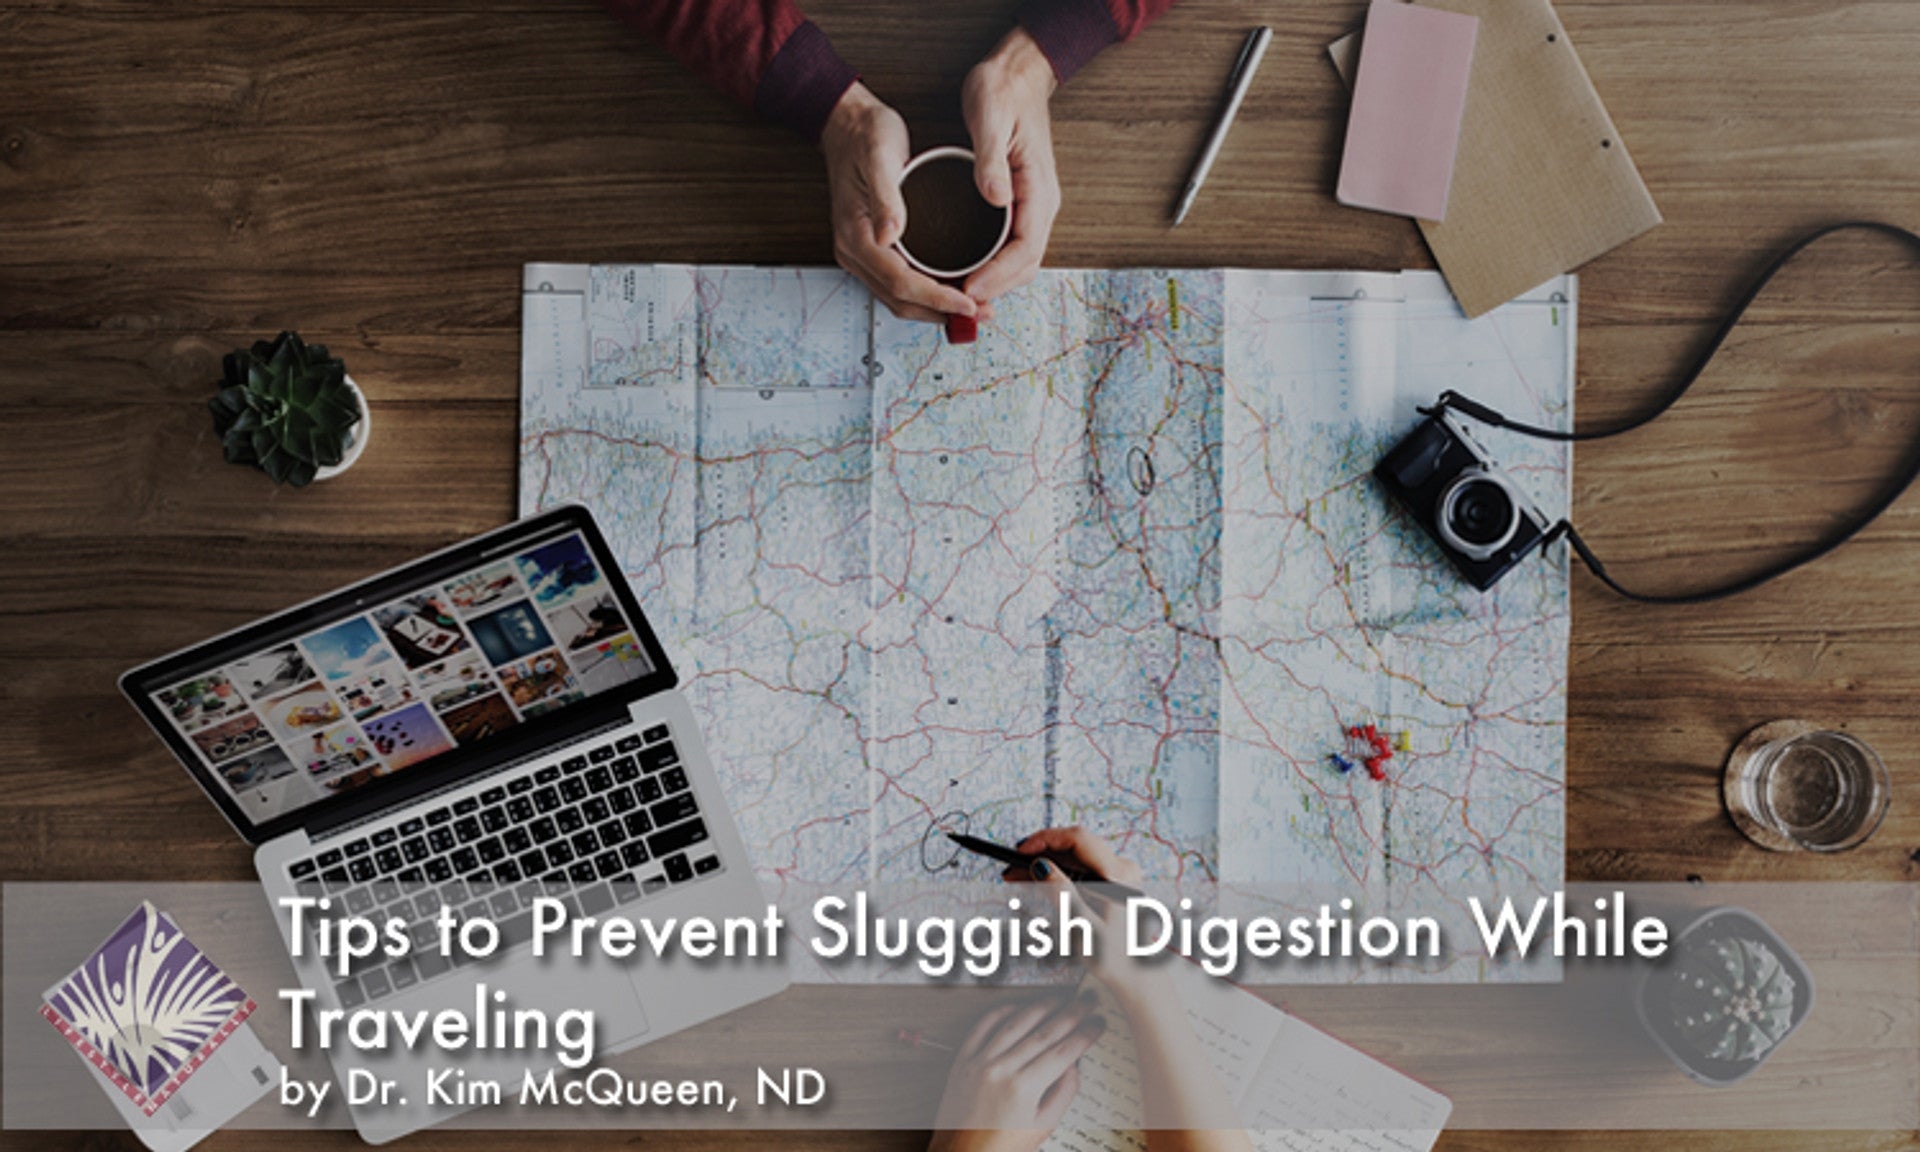 Tips to Prevent Sluggish Digestion While Traveling